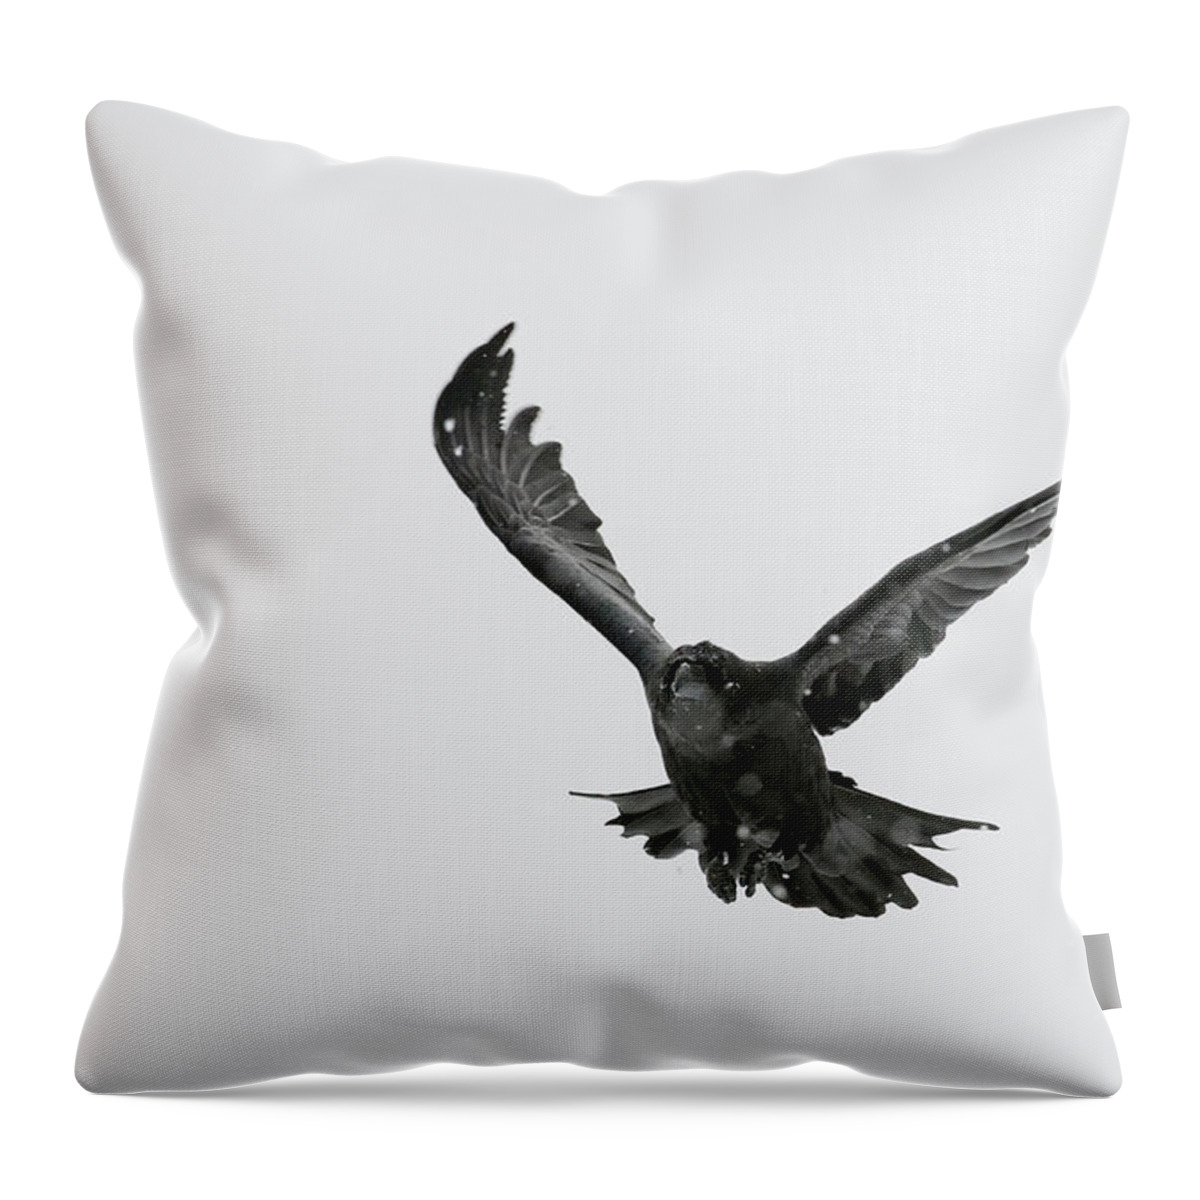 Black Color Throw Pillow featuring the photograph Black Raven by Alarifoto